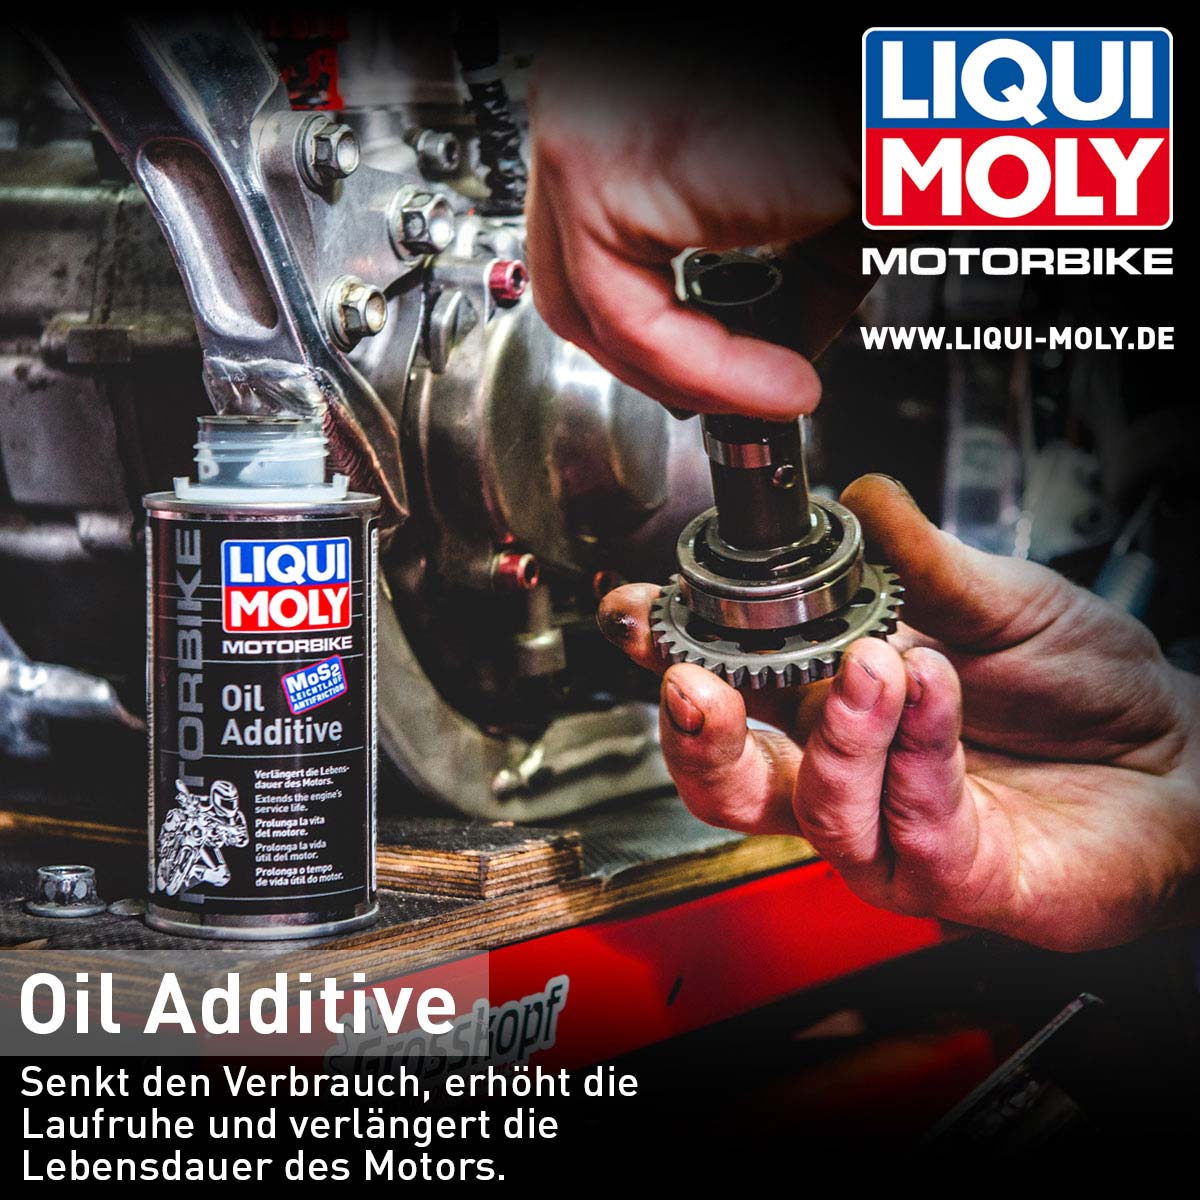 [Translate to Englisch:] LIQUI MOLY Oil Additive